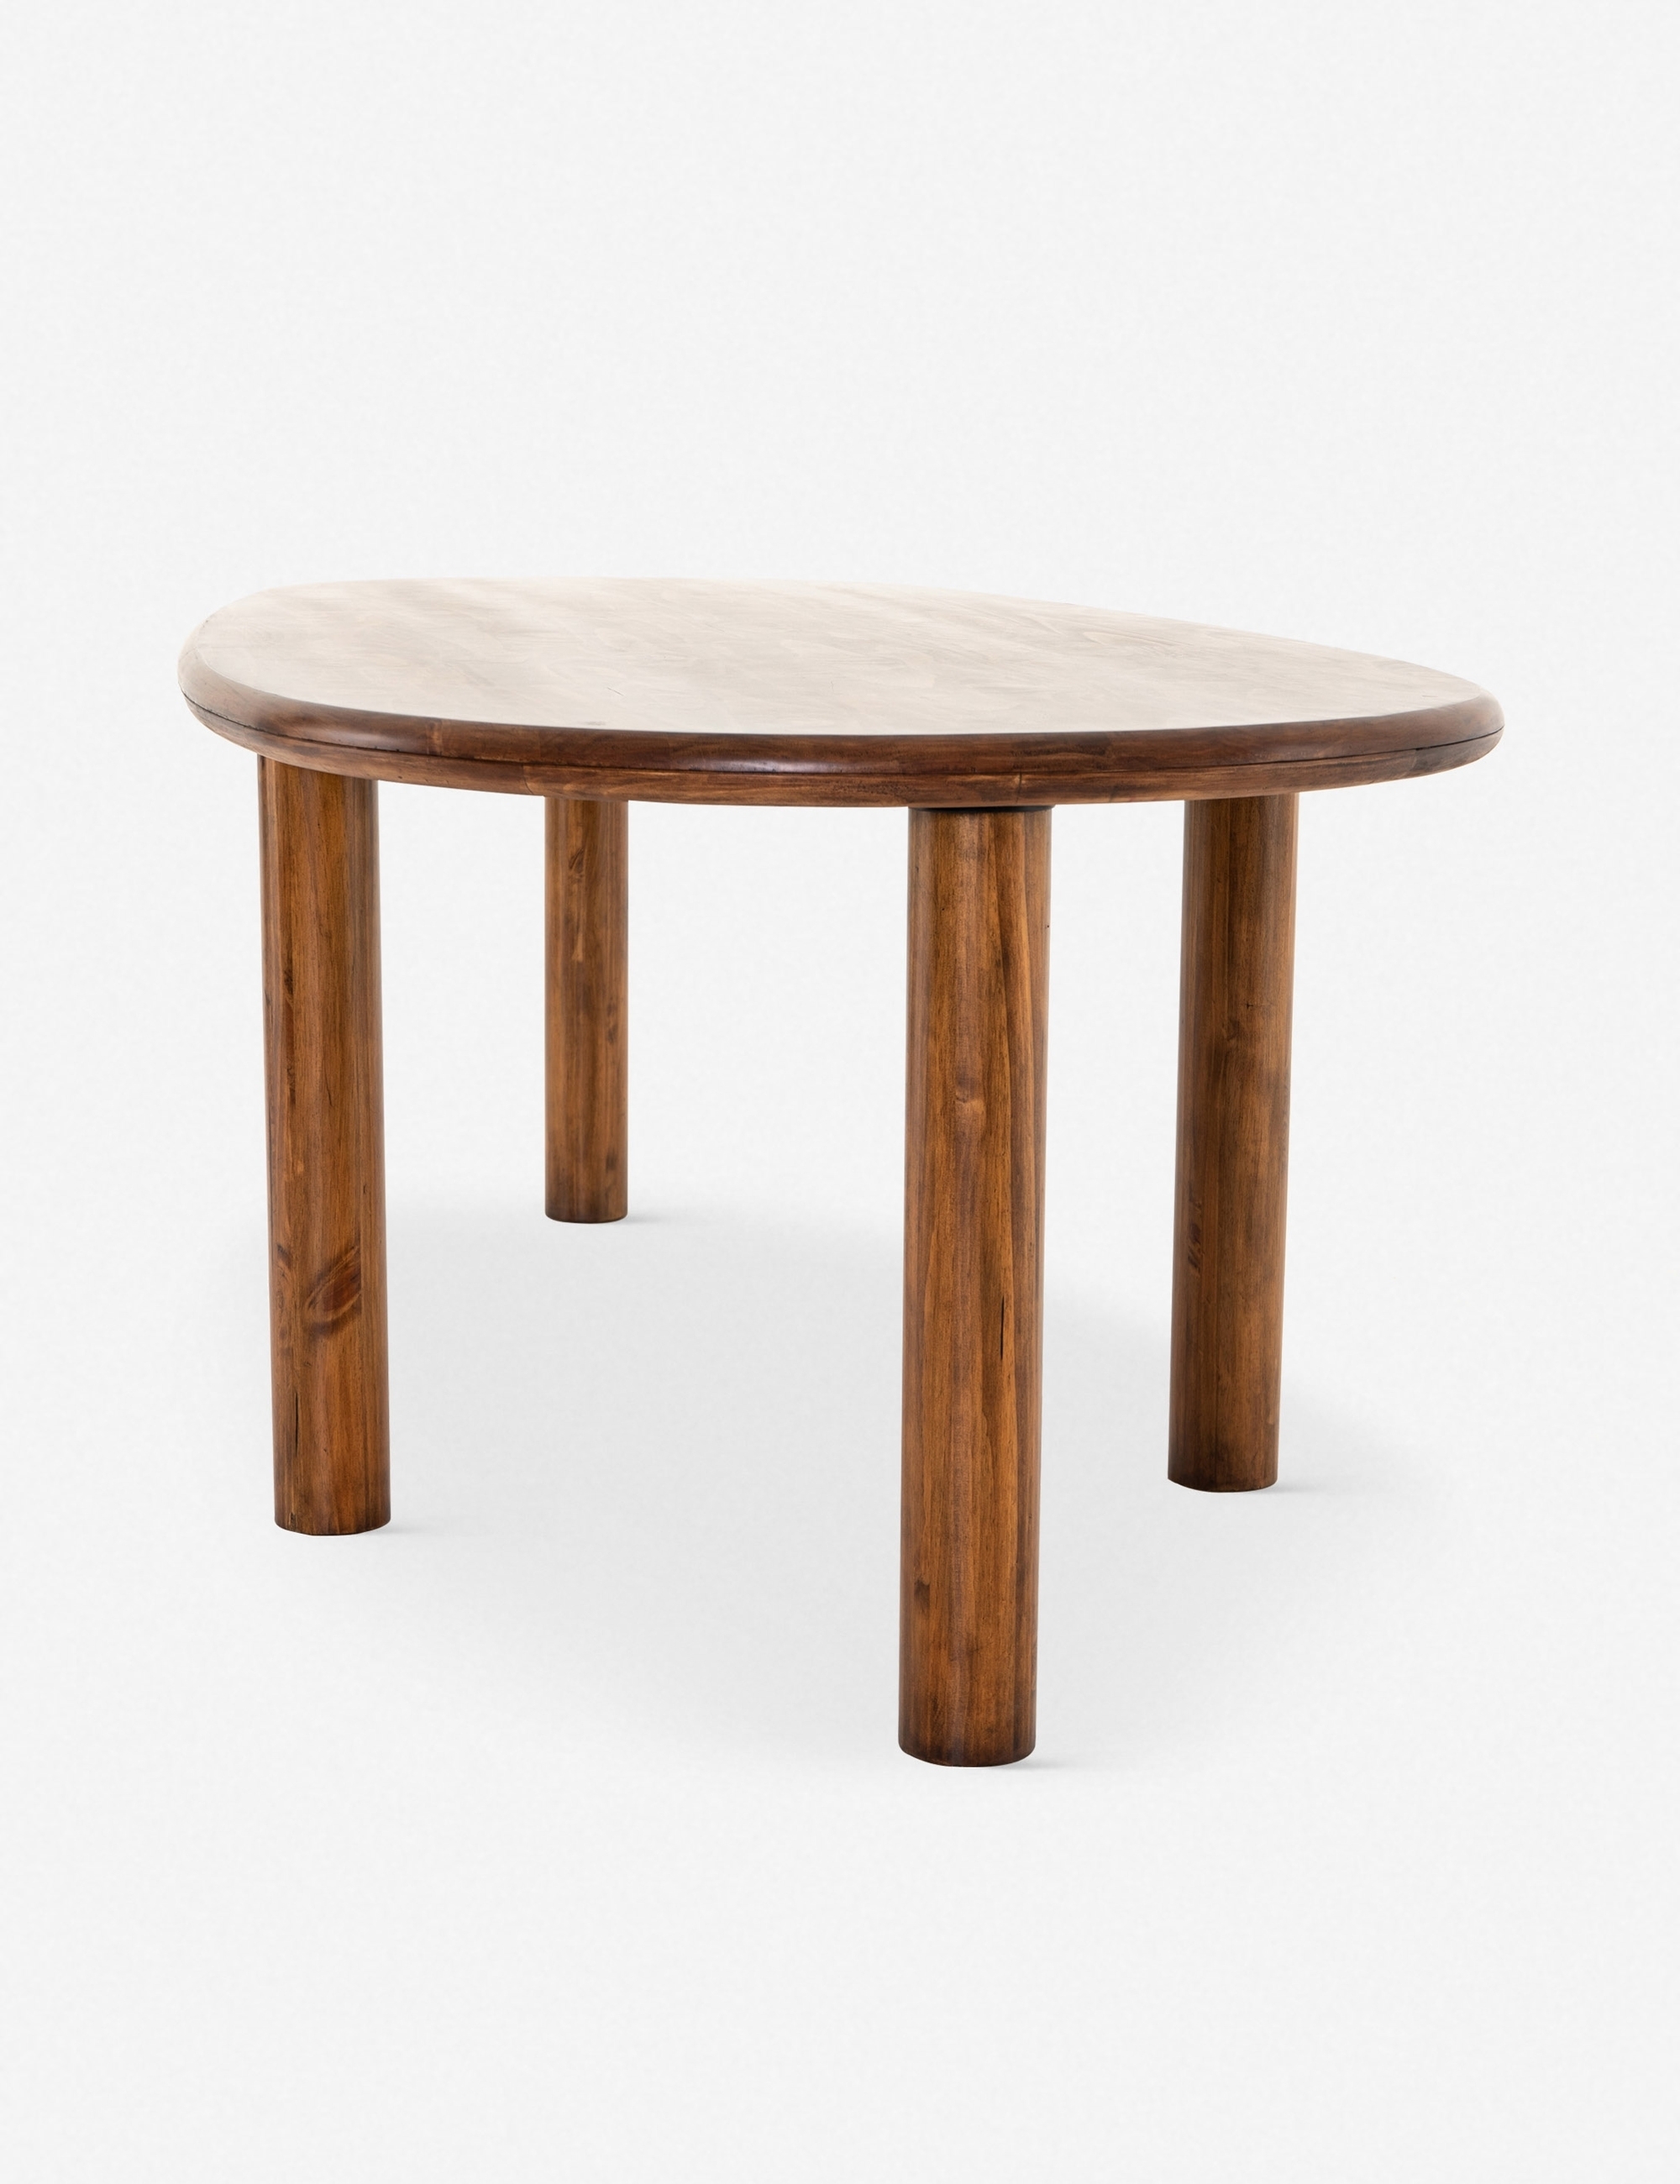 Marquesa Dining Table - Image 2